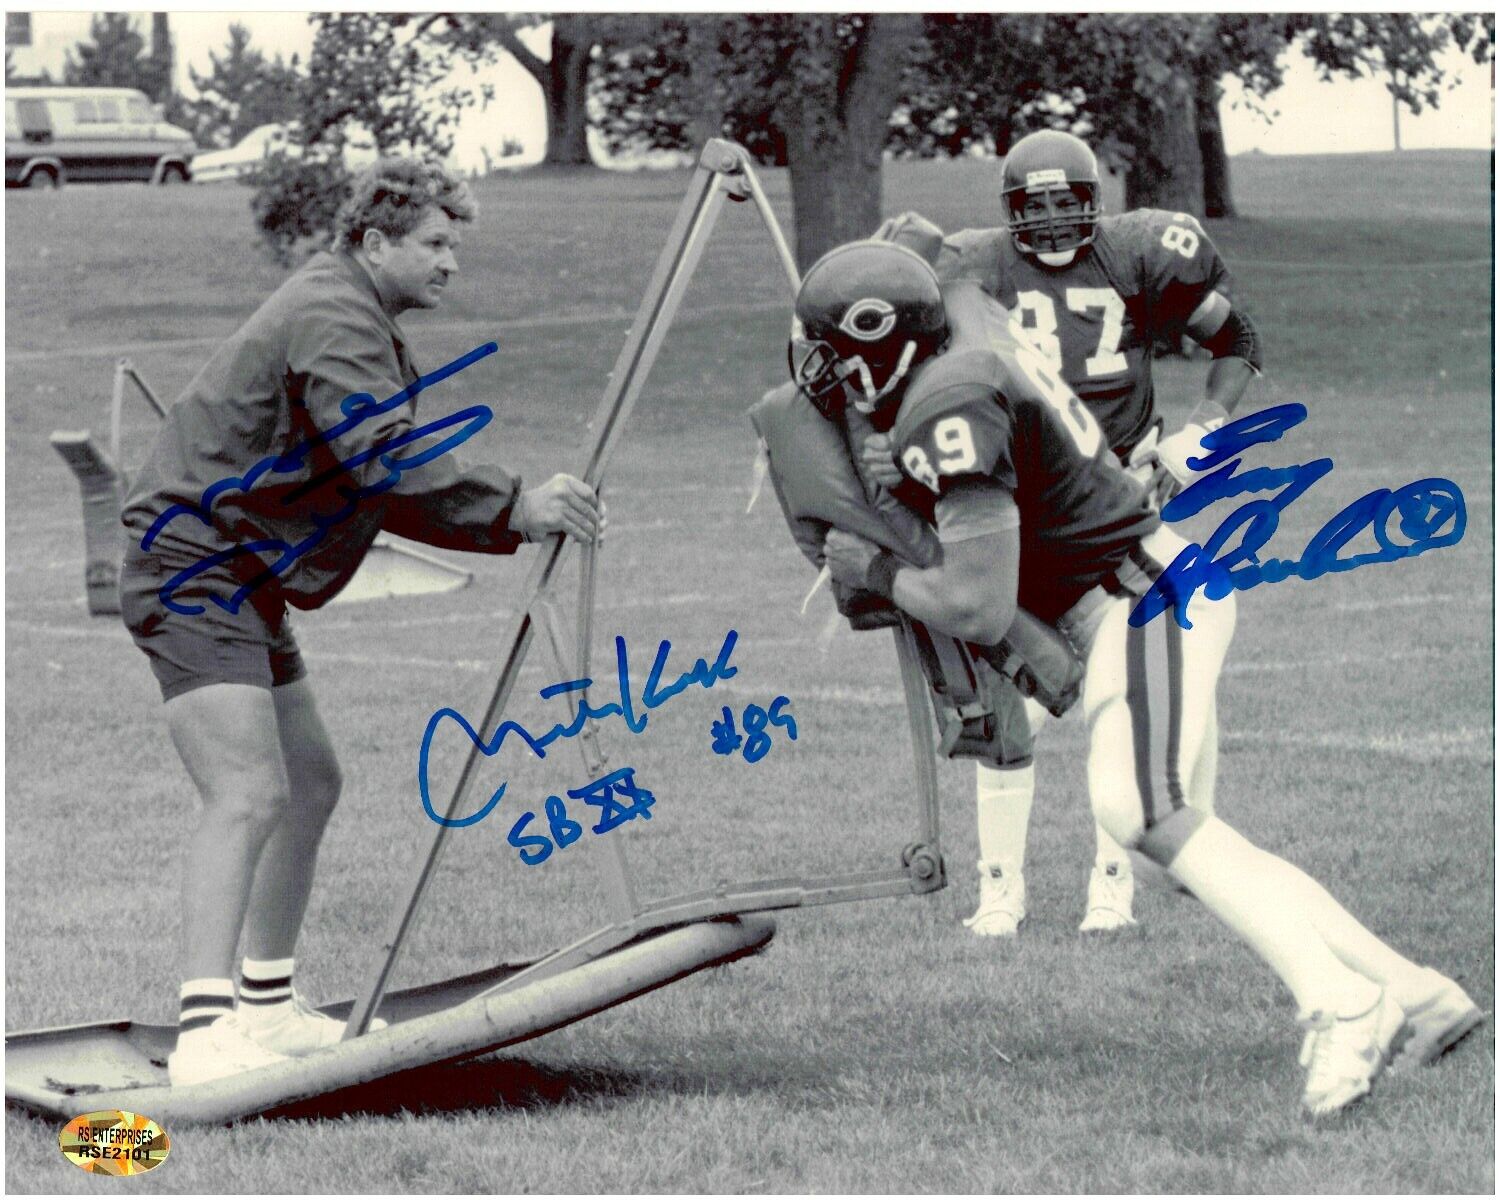 Mike Ditka, Emery Moorehead, Mitch Krenk Autographed 8x10 Photo RARE PHOTO (A)